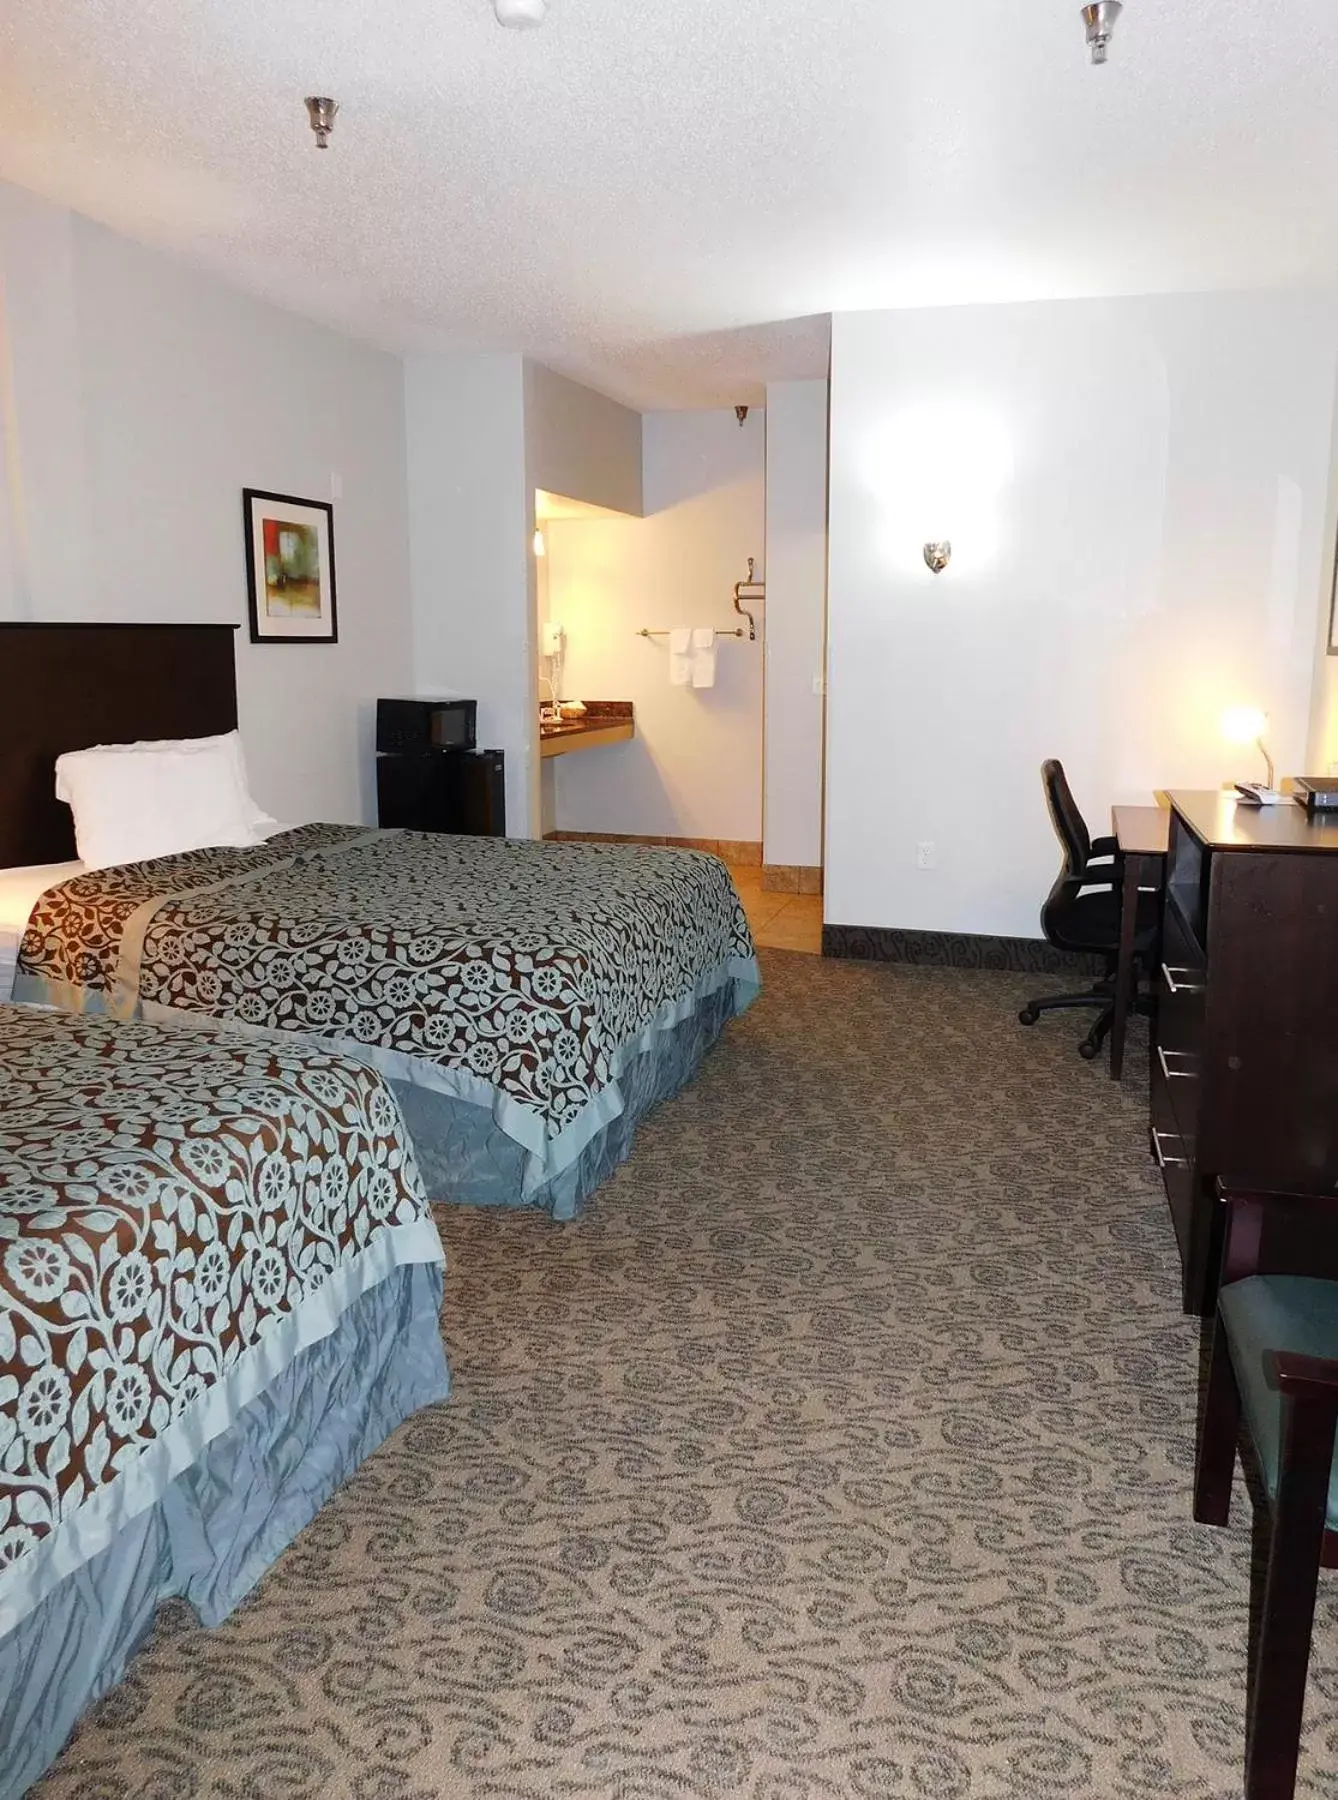 Facility for disabled guests in Days Inn by Wyndham Fargo/Casselton